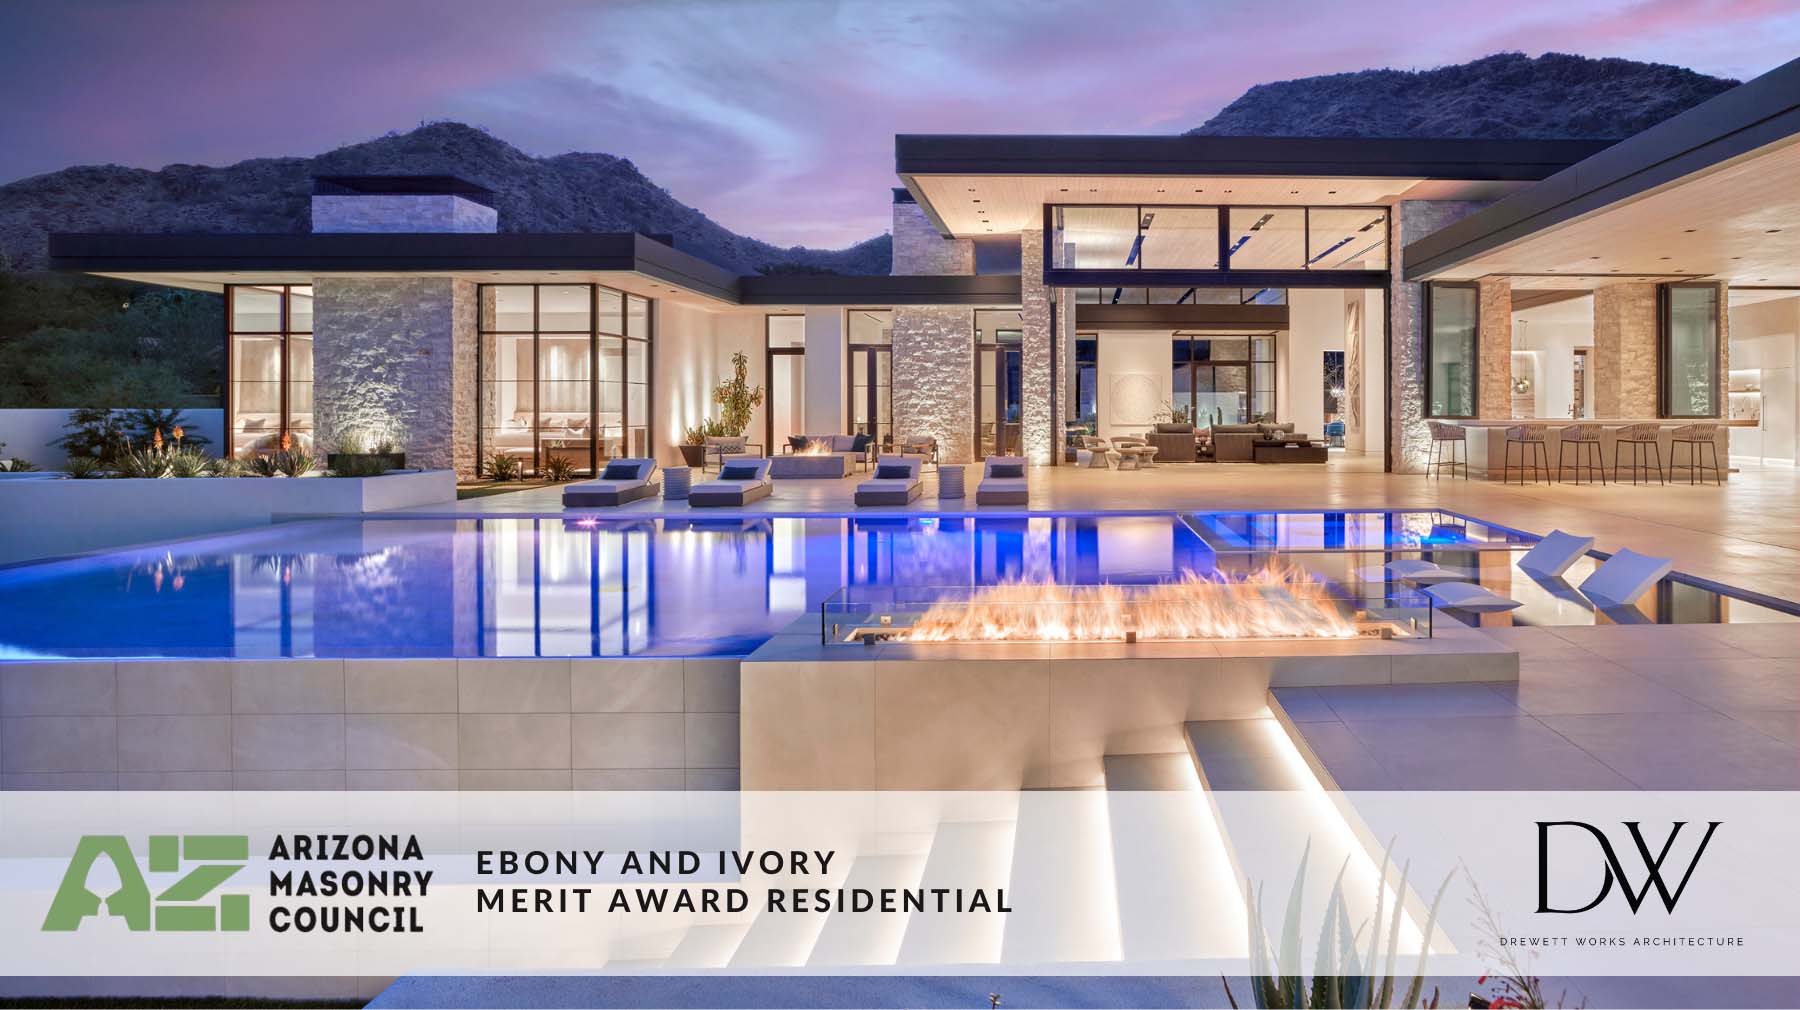 Excellence in Masonry 23 feature 3 Located in Scottsdale Ariz Drewett Works is an award winning architecture firm specializing in luxury residential hospitality and commercial architecture